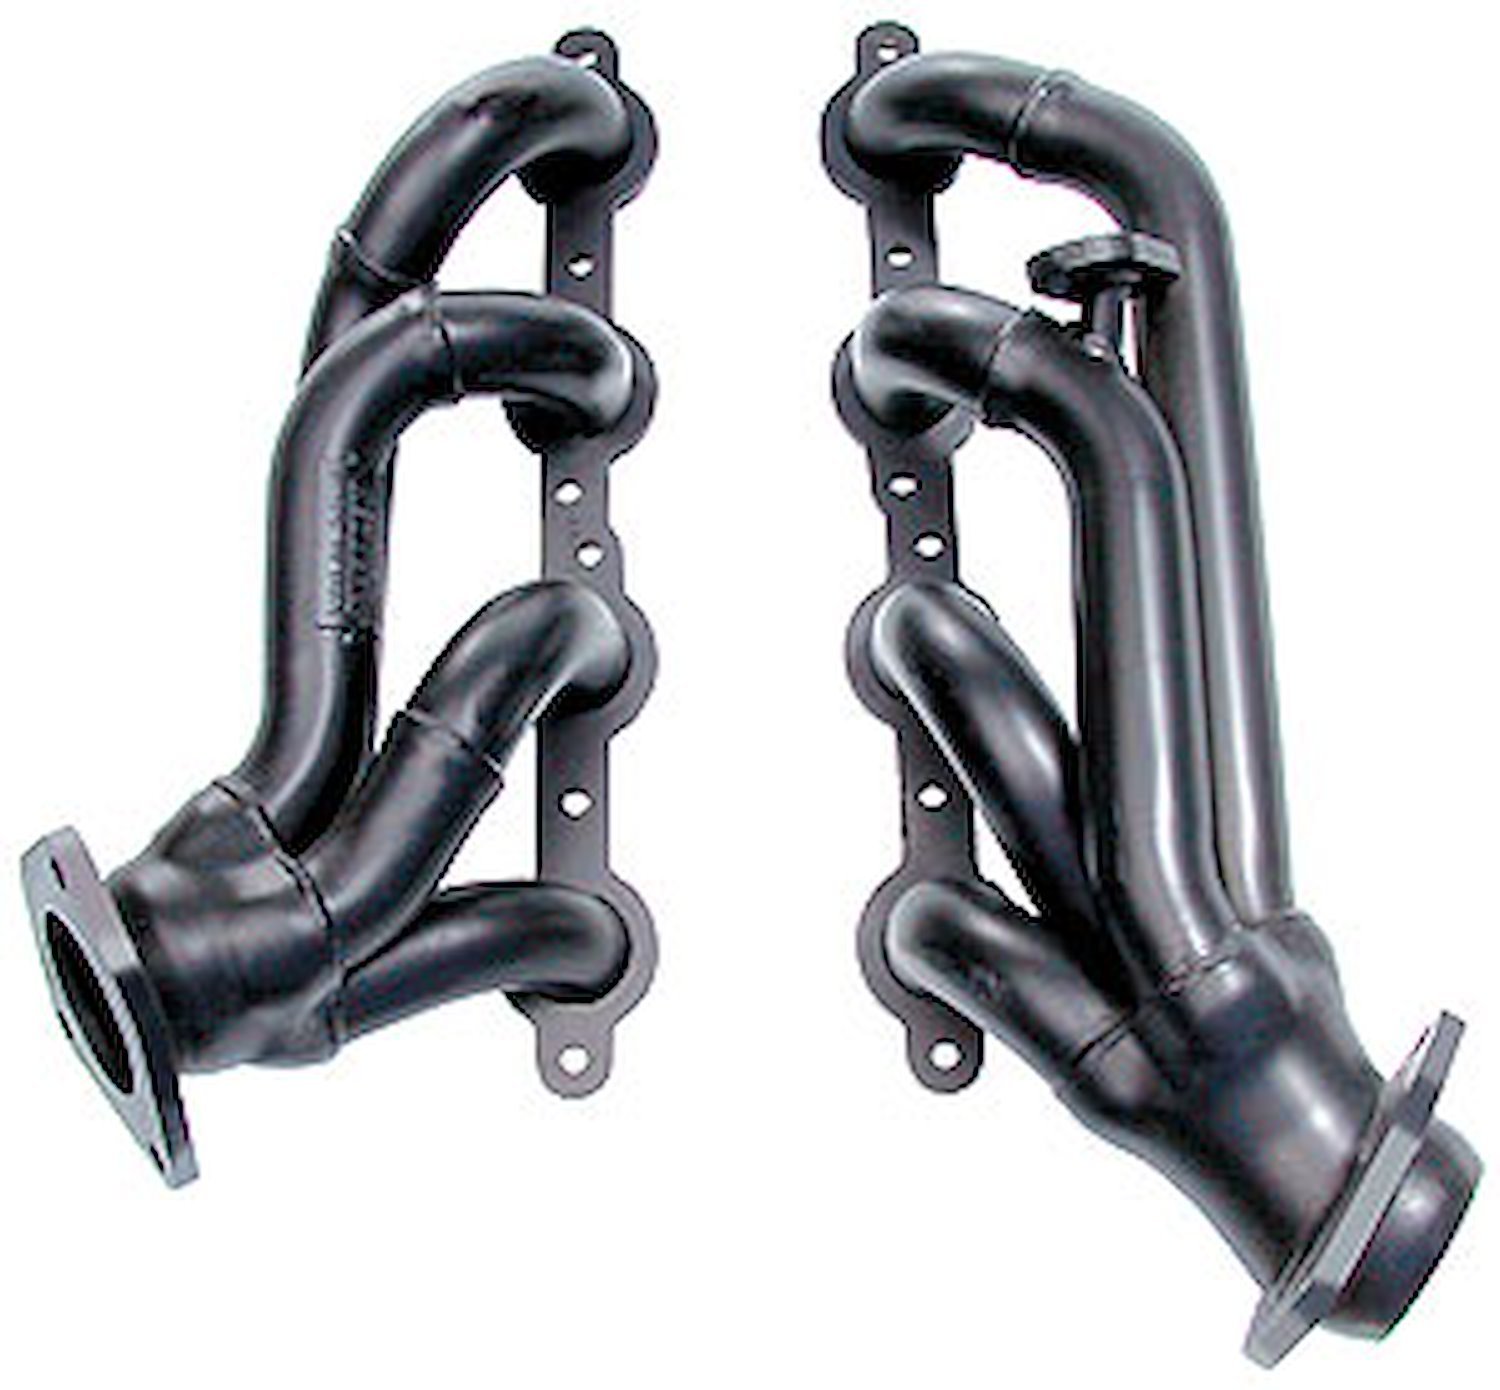 Standard Duty Uncoated Shorty Headers for 1999-2003 Suburban, Yukon, Escalade, Truck 2WD/4WD 4.8L/5.3L/6.0L